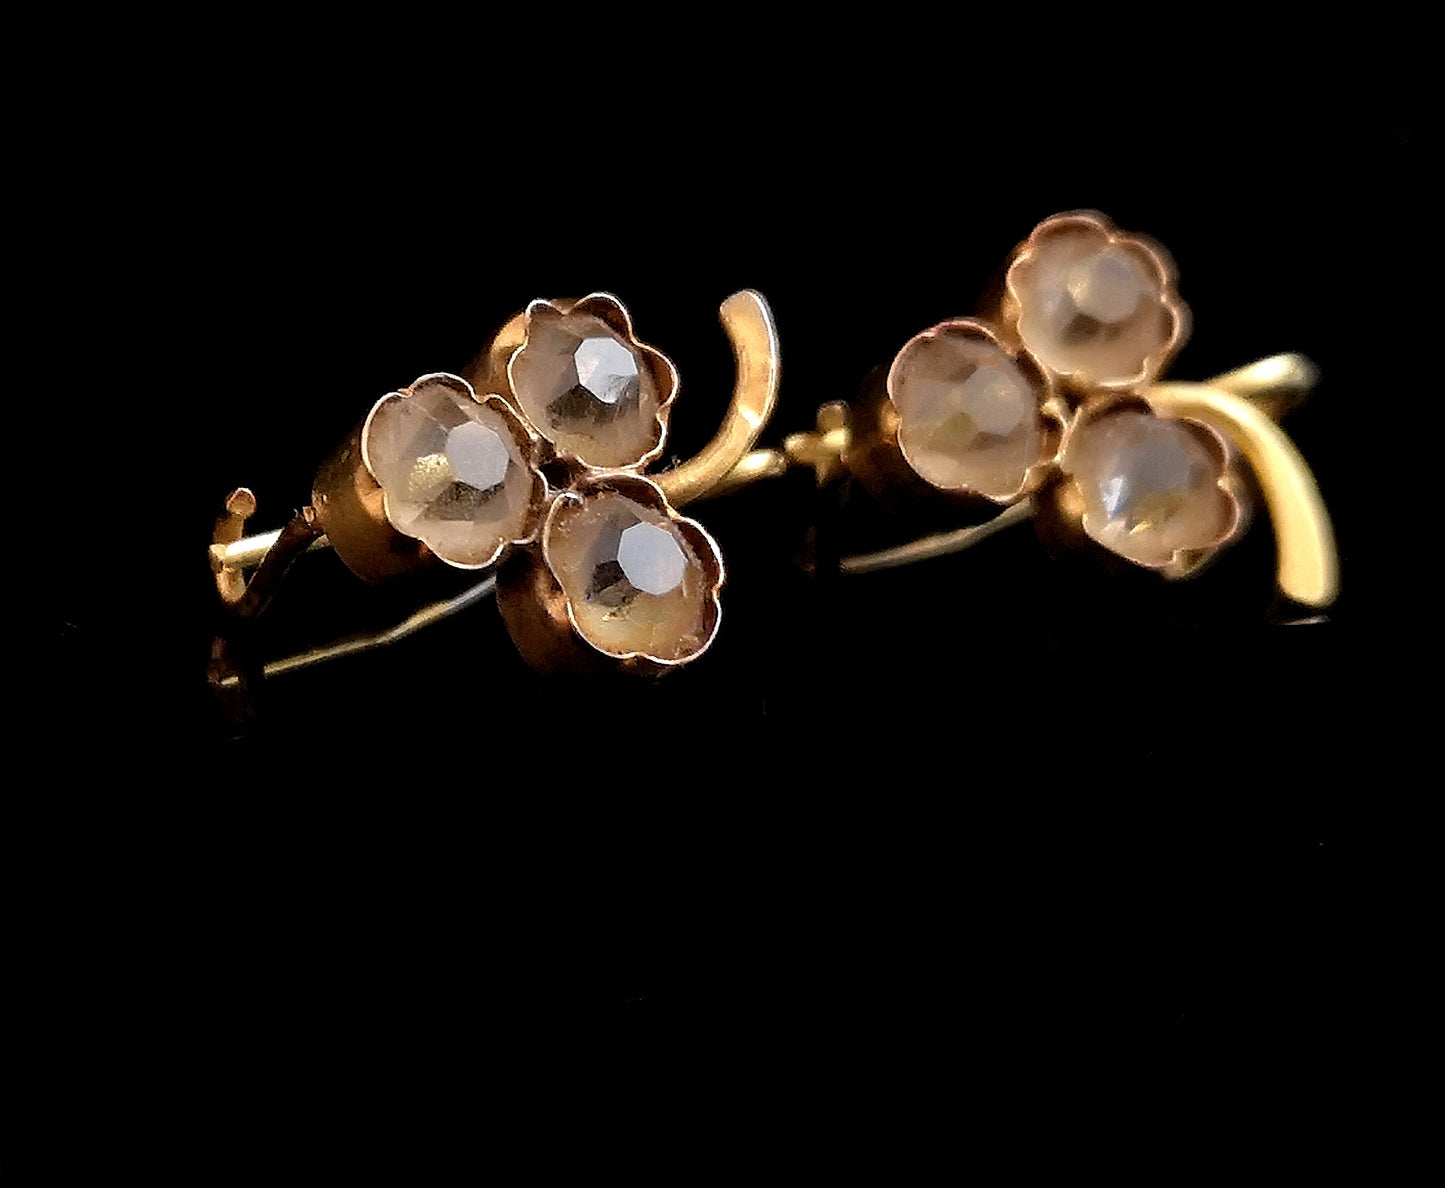 Antique Victorian 18ct gold Grape earrings